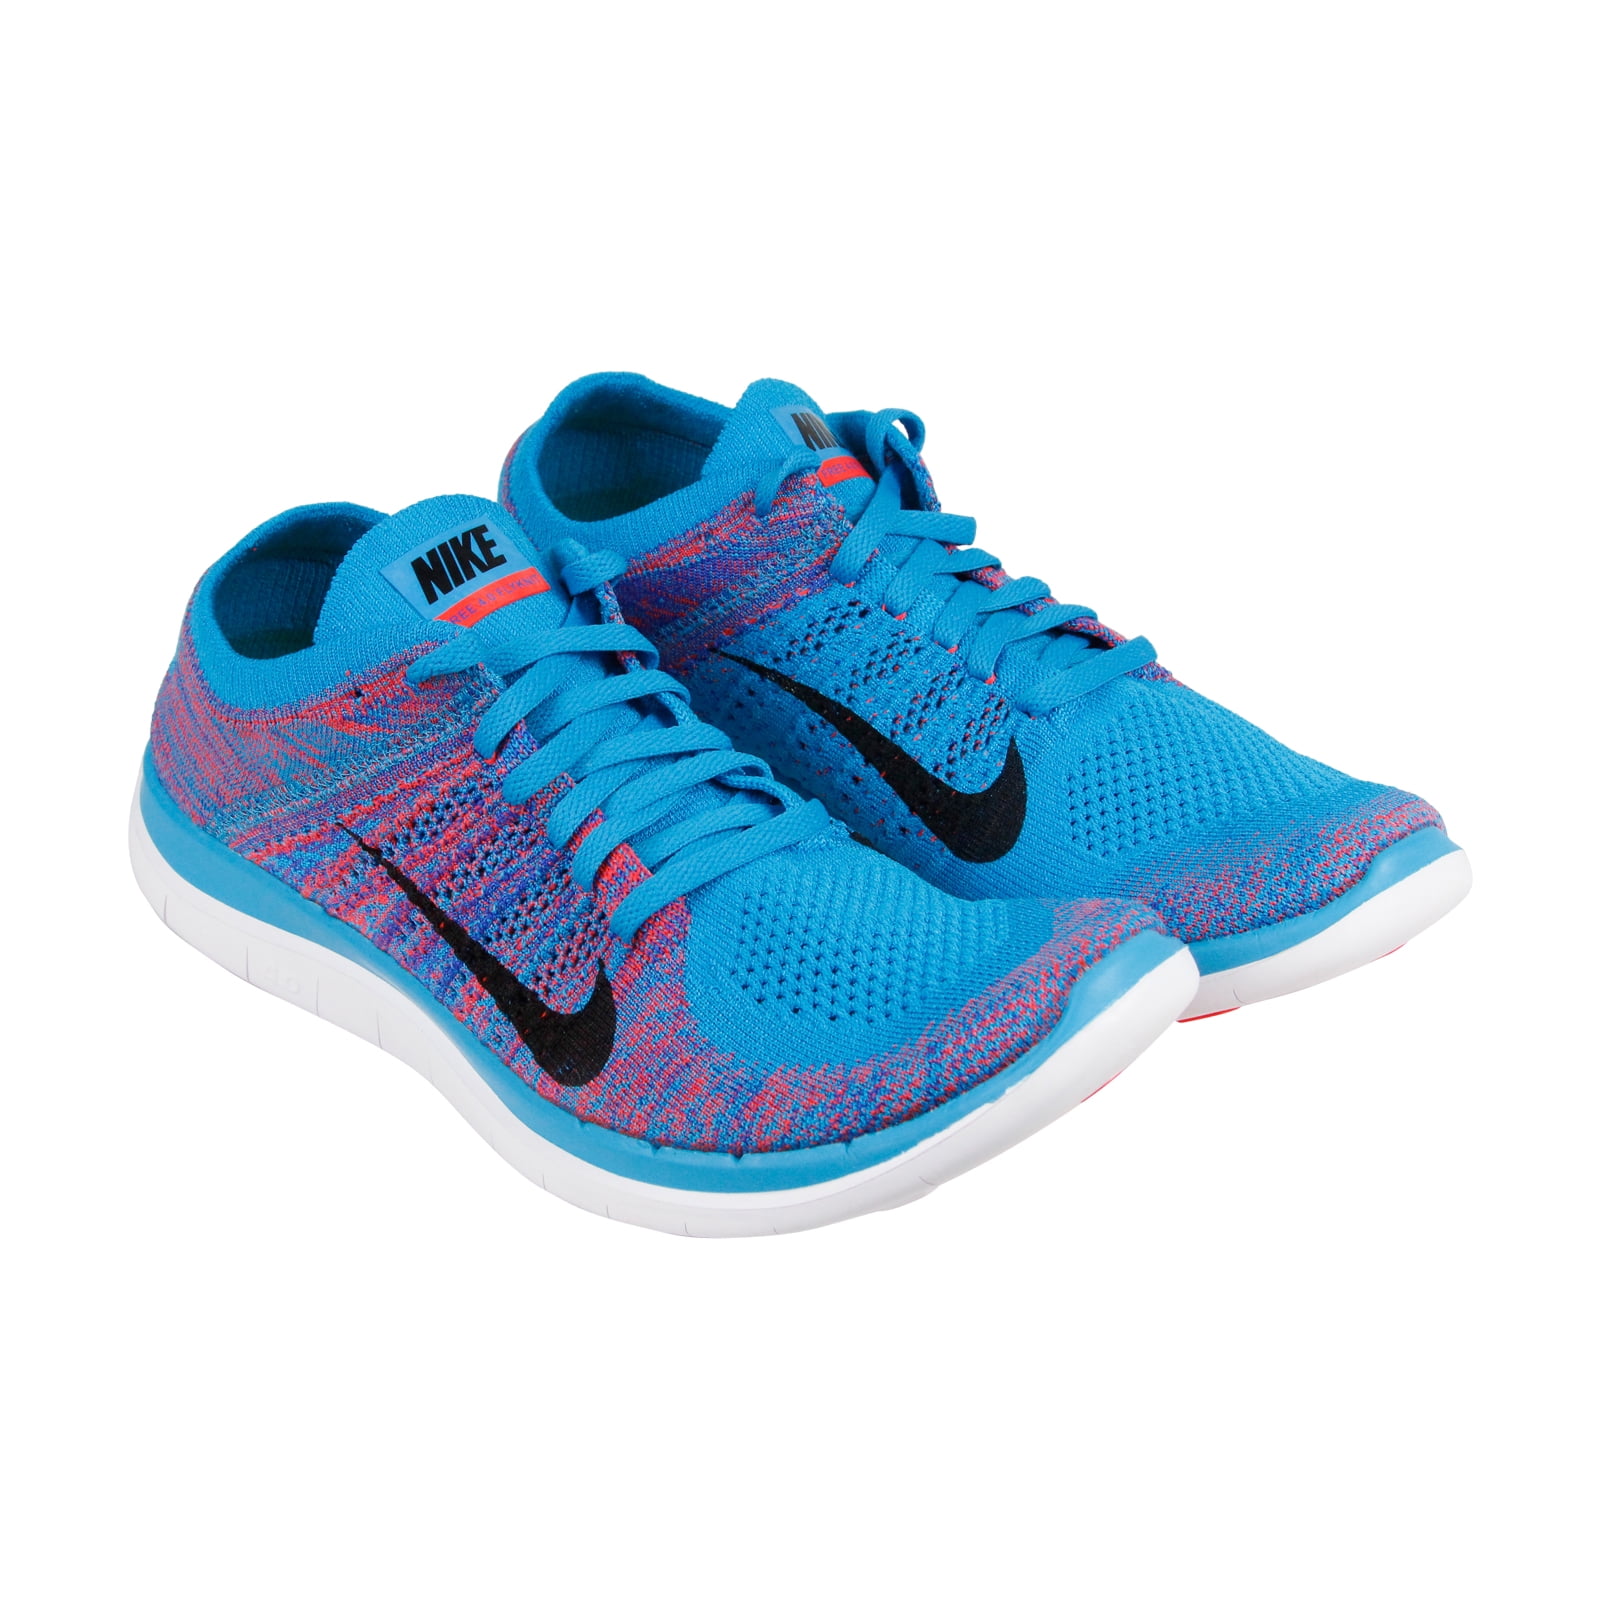 Recollection Hofte udkast Nike Free 4.0 Flyknit Mens Blue Mesh Athletic Lace Up Running Shoes -  Walmart.com